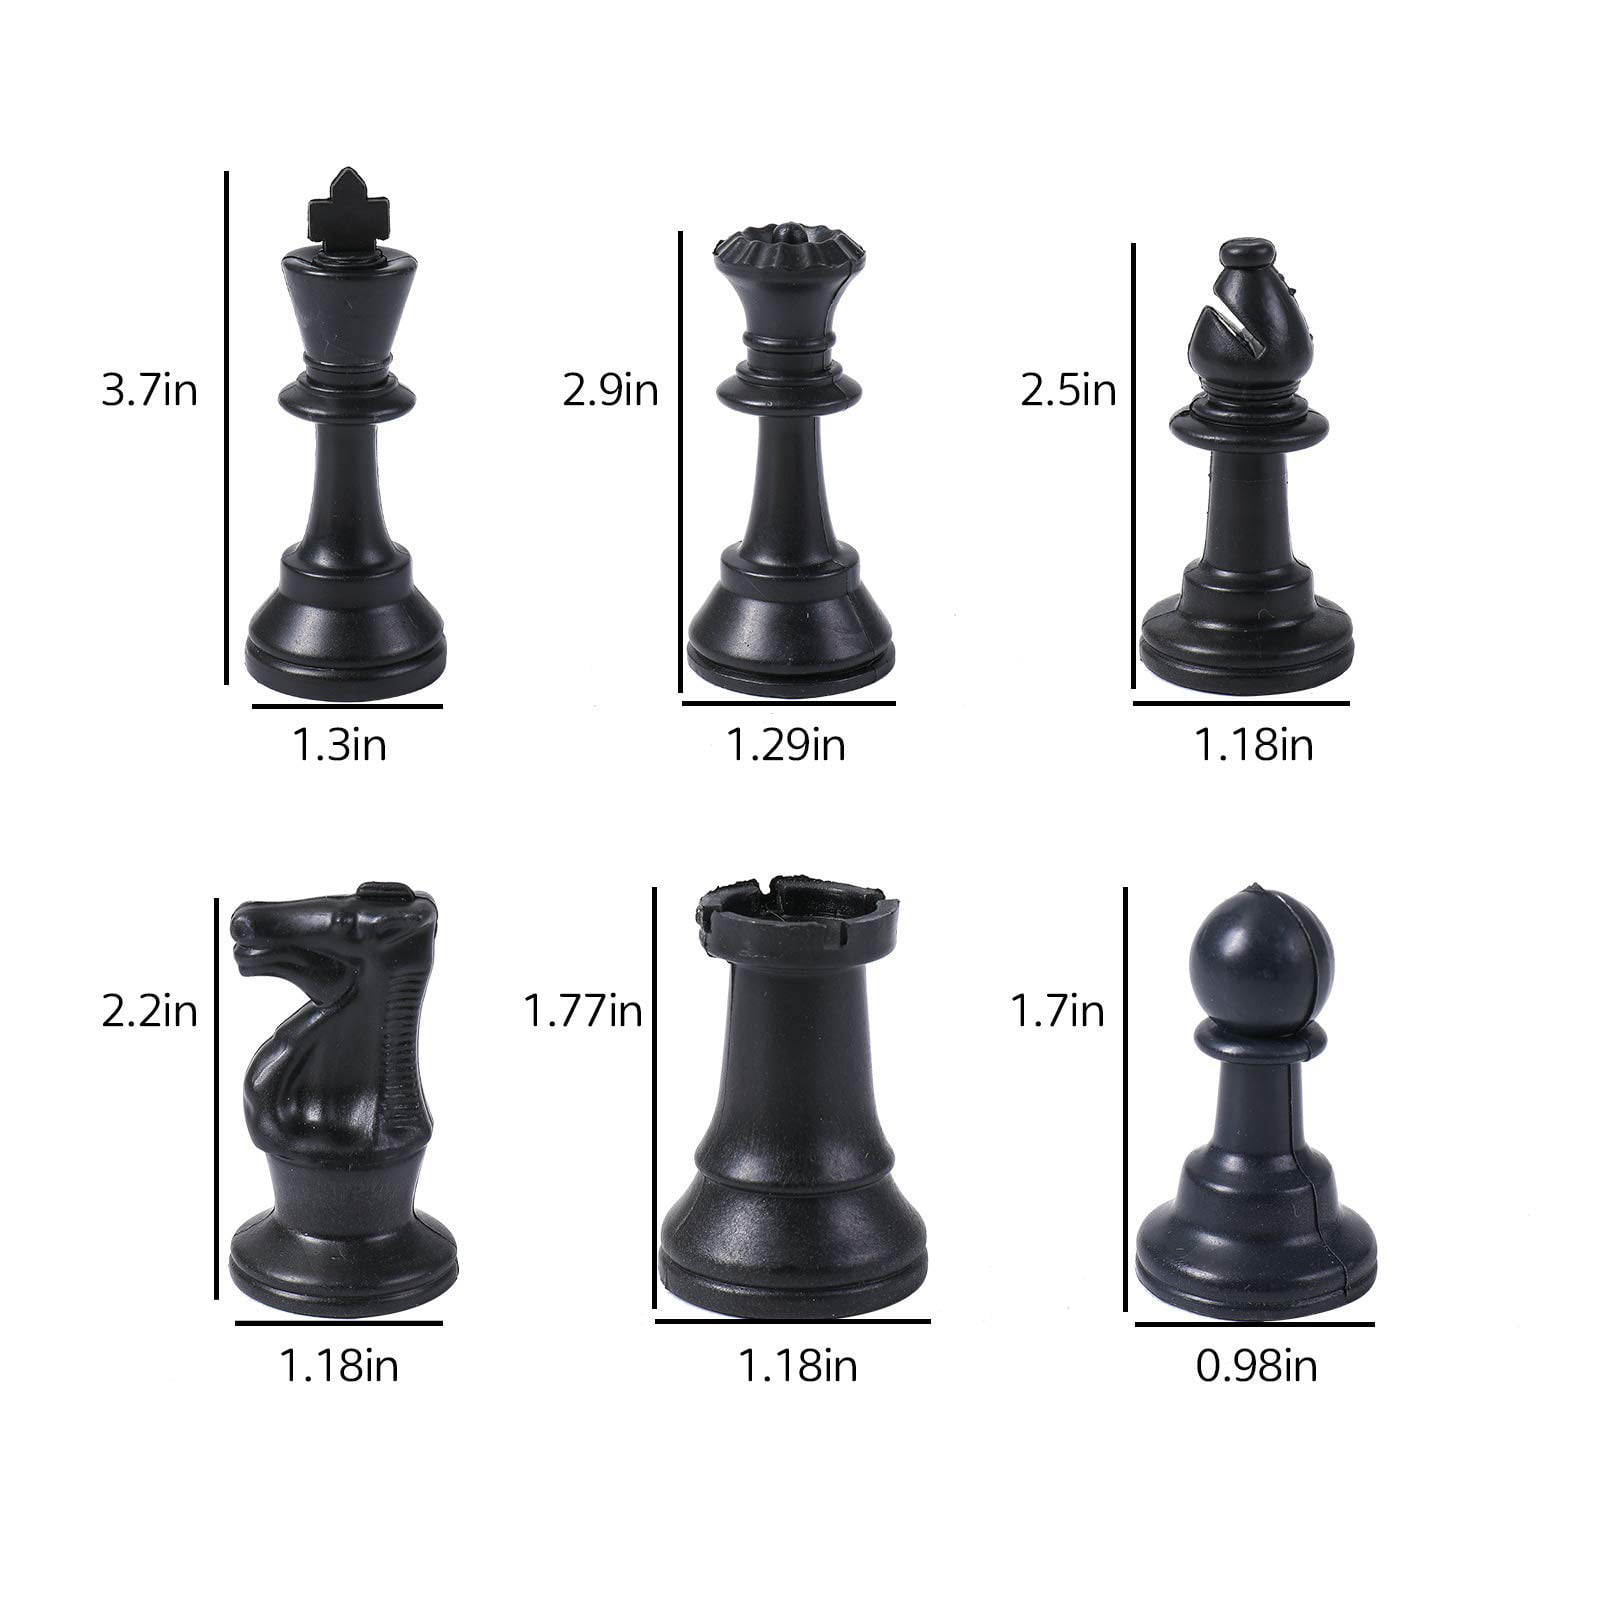 Roll Up Chess Board Set, Rollable Foldable Increase Feelings Entertainment  Game Portable Chess Board Set For Travel For Picnic King Height 95MM 